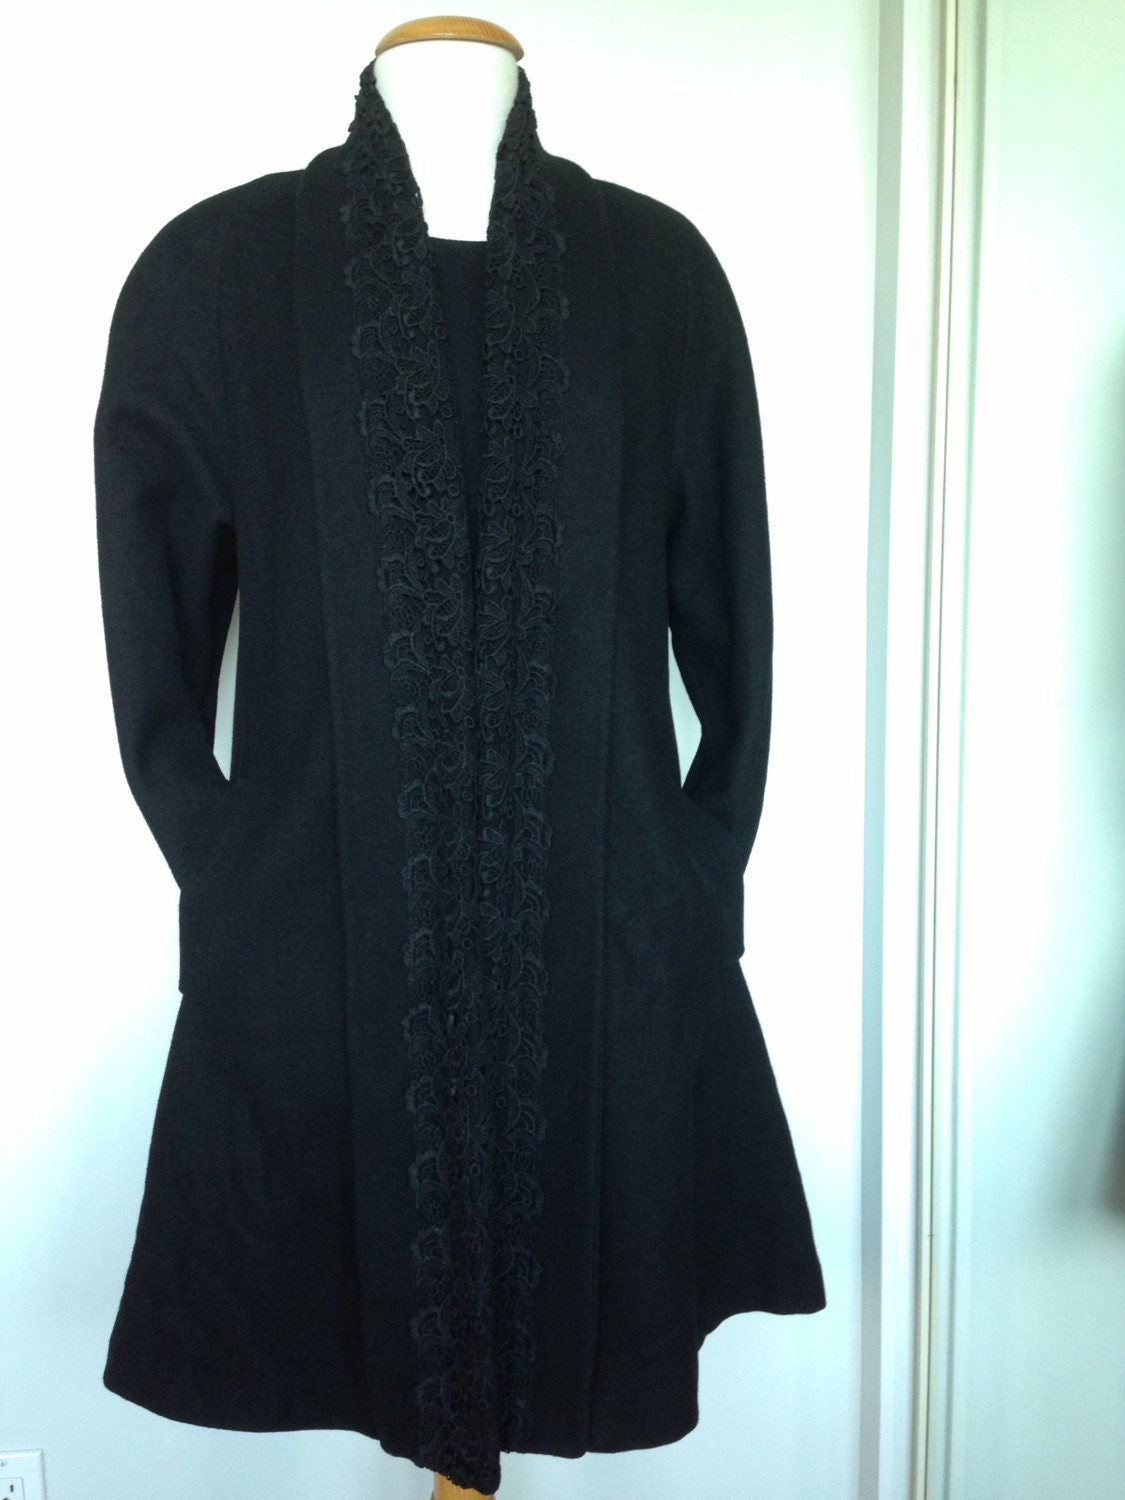 Paris LUBA Designer Fall Winter Coat Jacket In Black With Lace